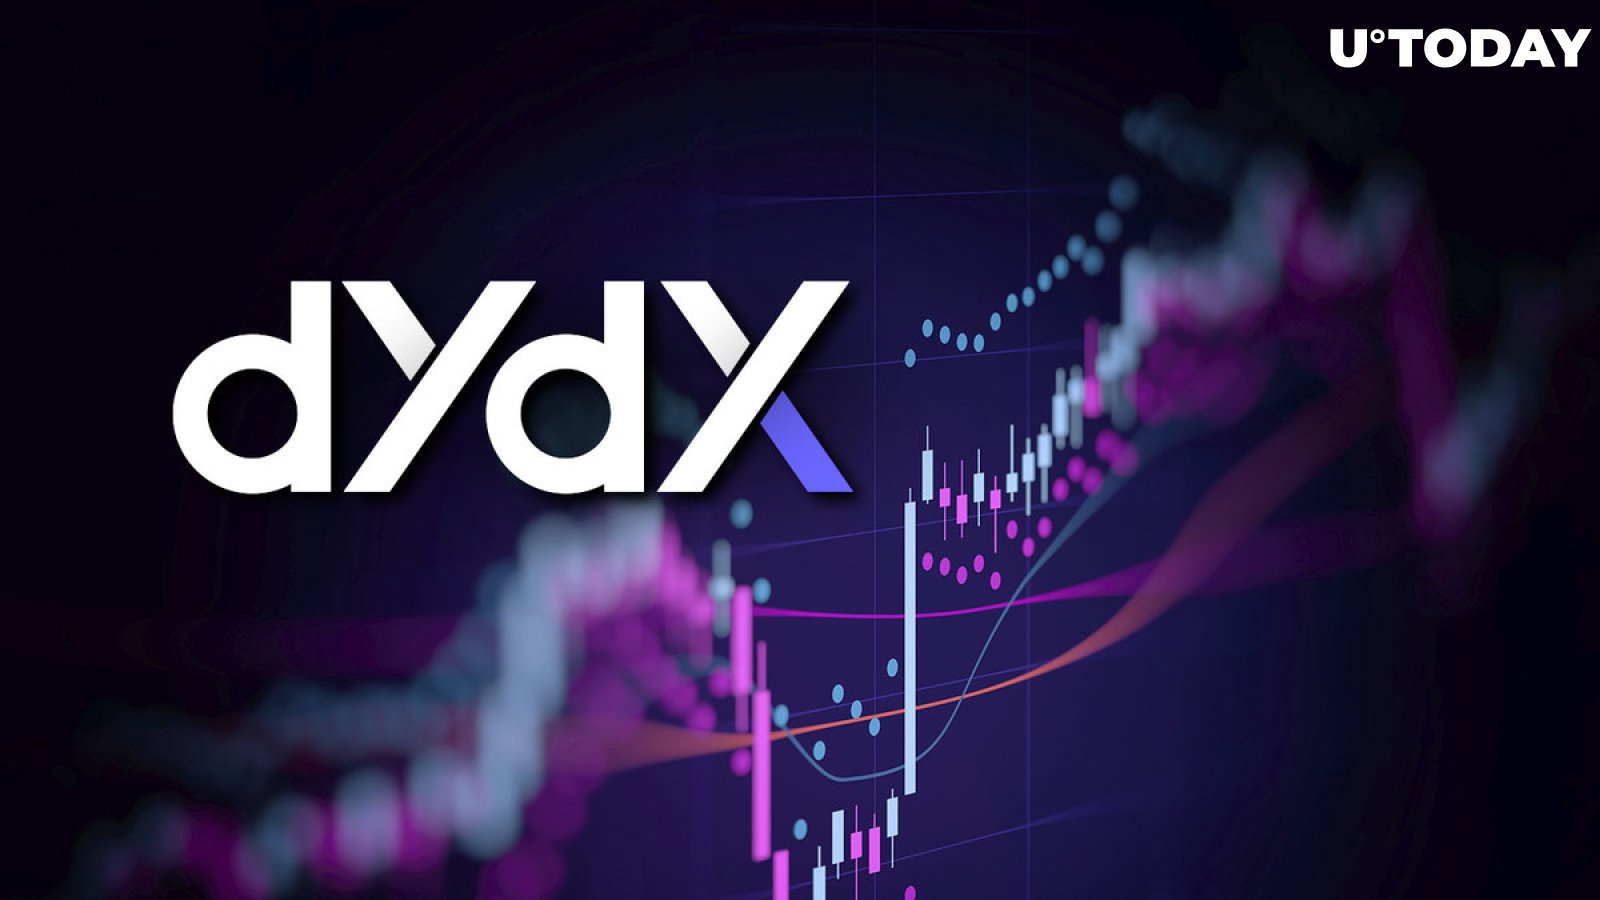 dYdX Governance Token Shows 18% Price Increase, 3 Reasons Why